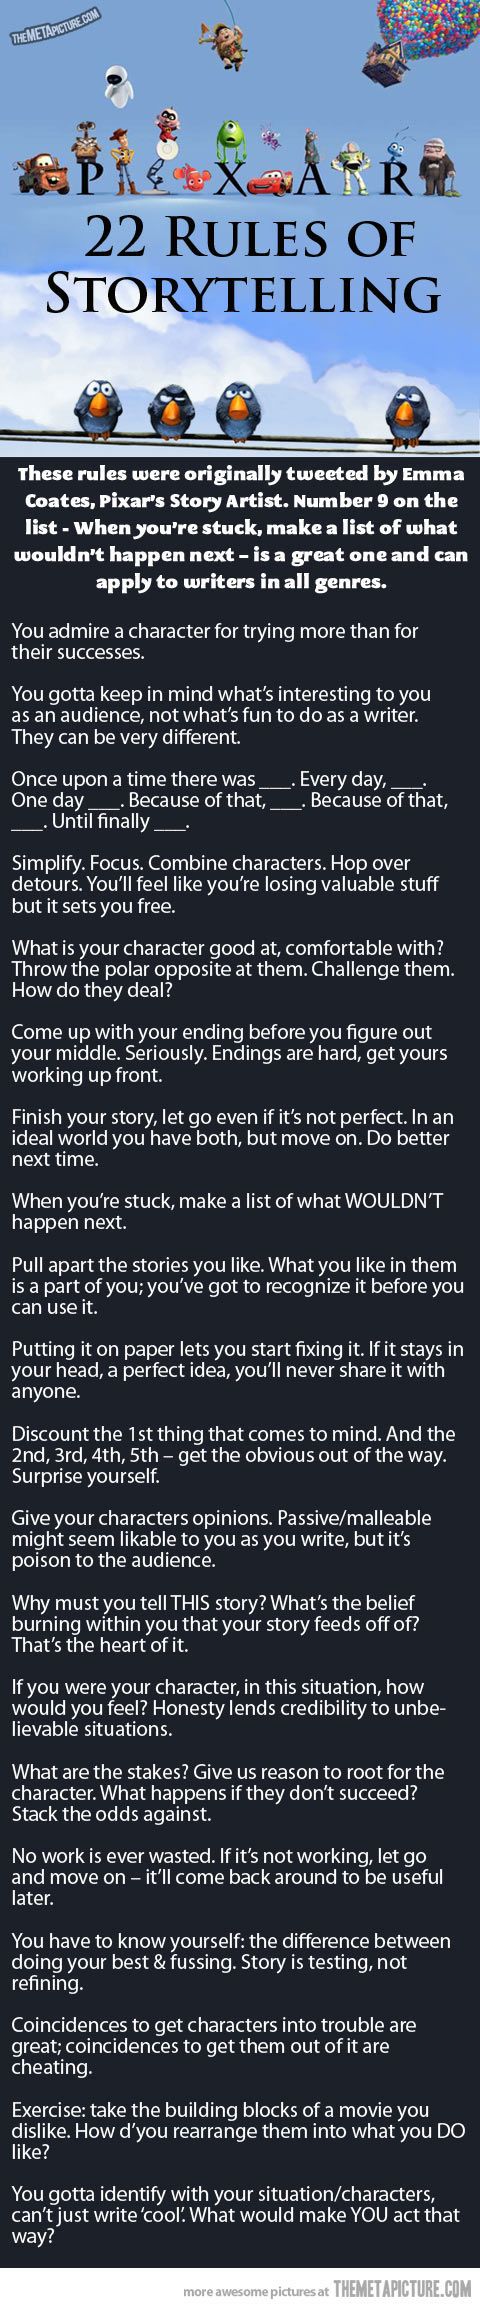 Pixar's 22 Rules of Storytelling [Infographic]